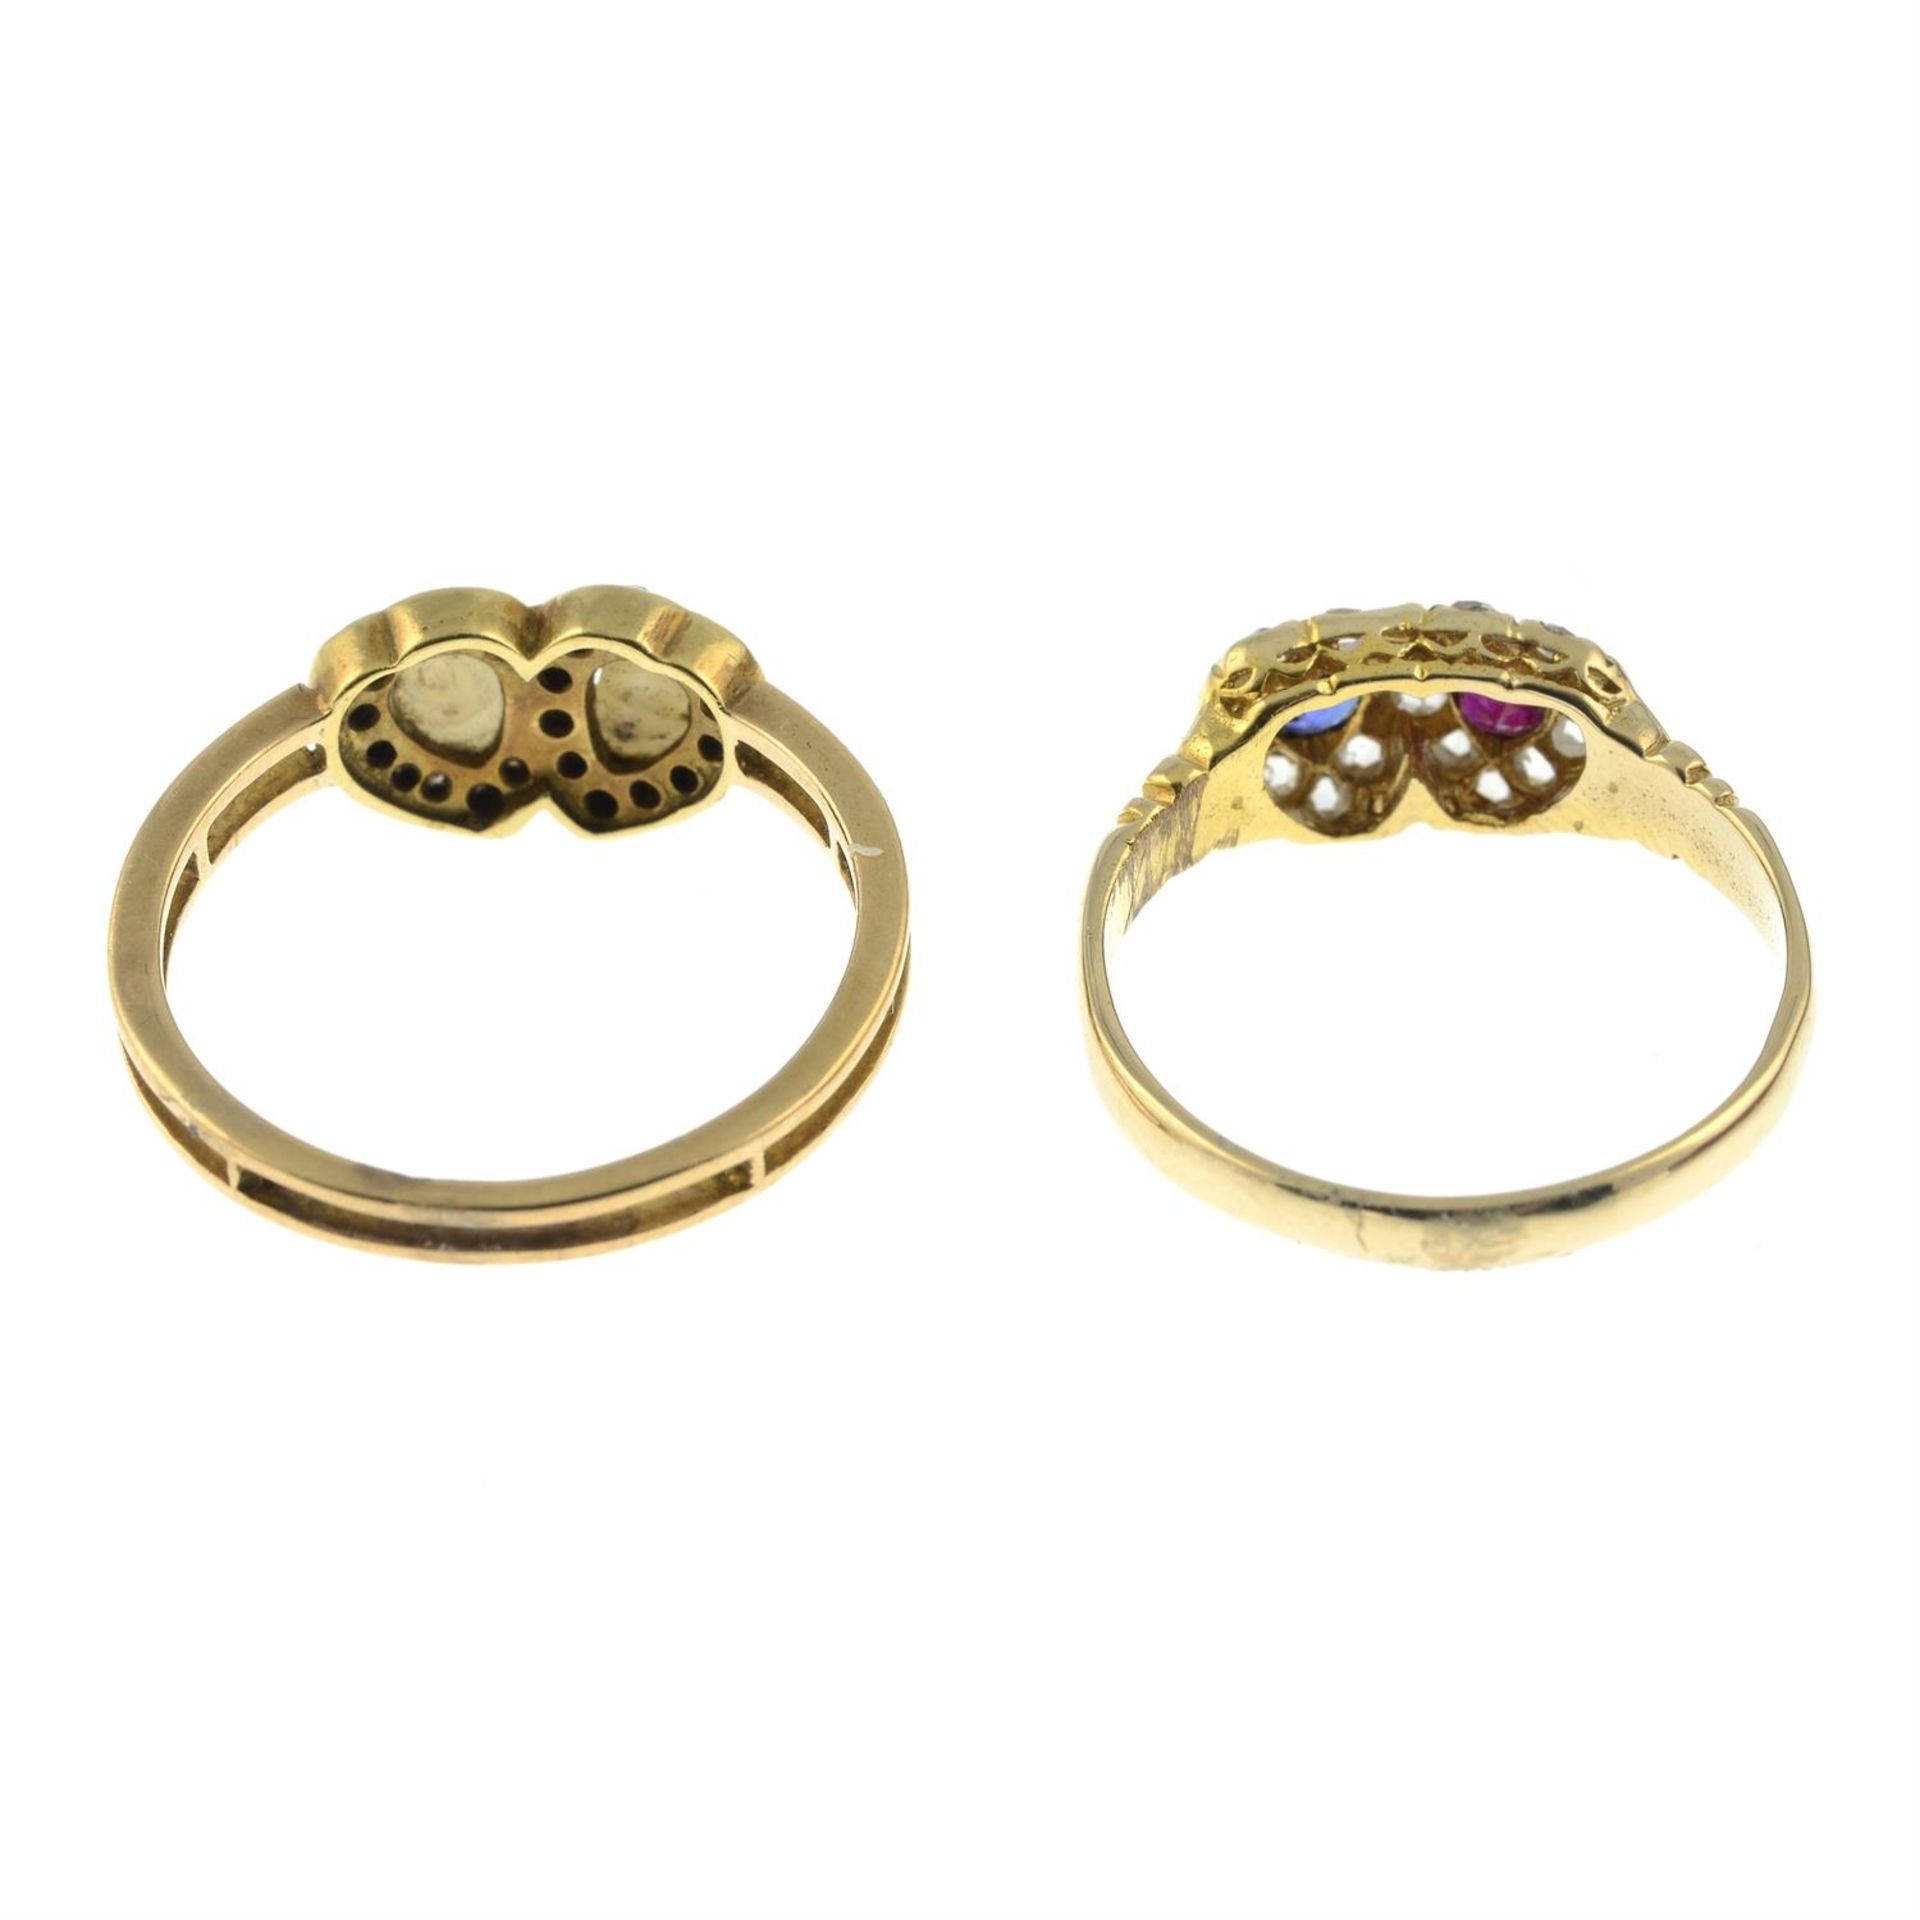 Two late 19th century gold gem-set double heart rings. - Image 4 of 6